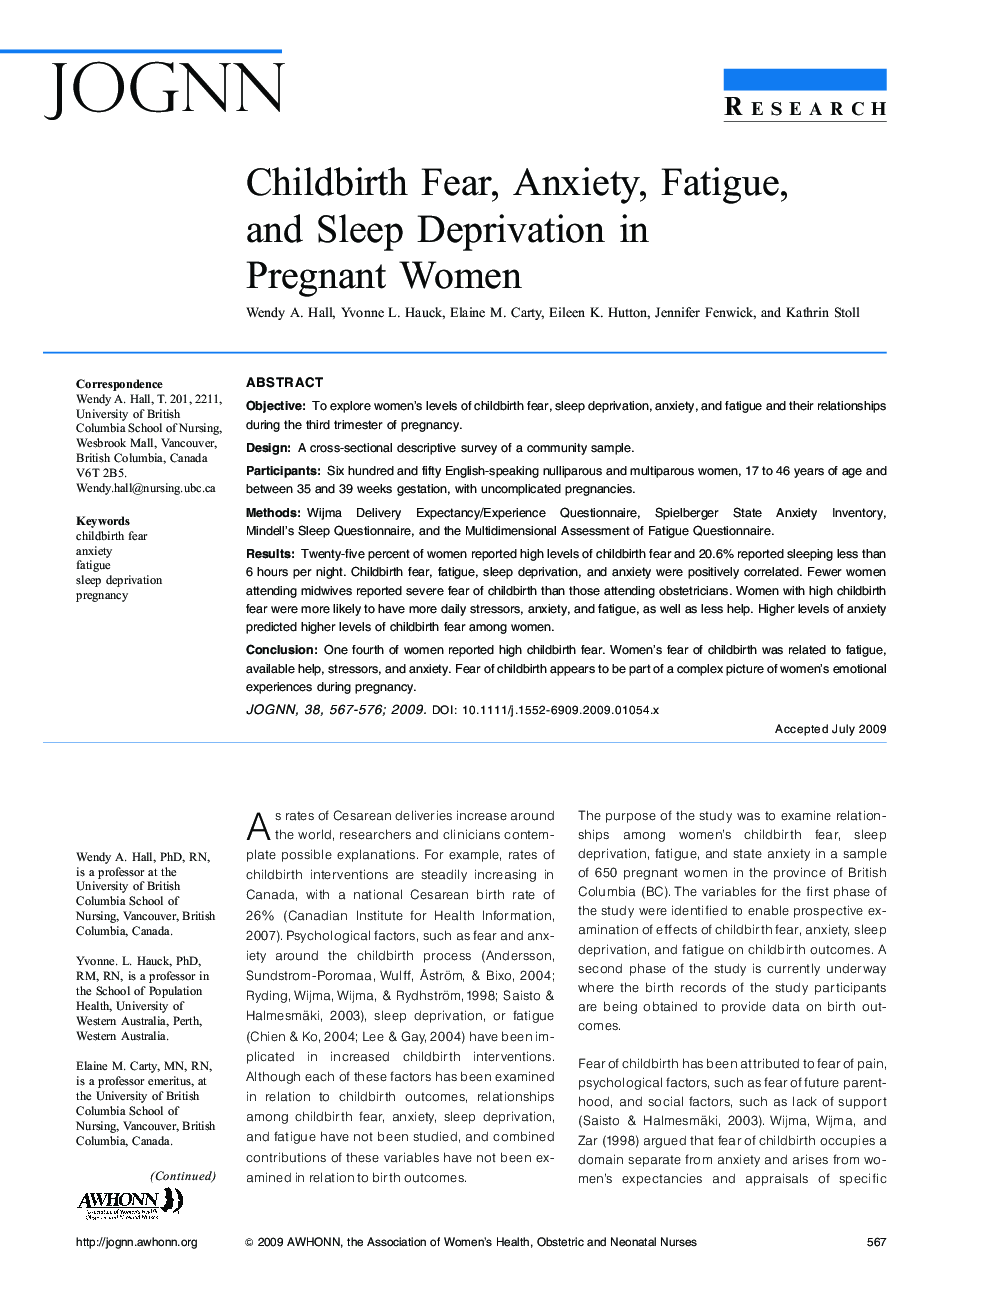 Childbirth Fear, Anxiety, Fatigue, and Sleep Deprivation in Pregnant Women